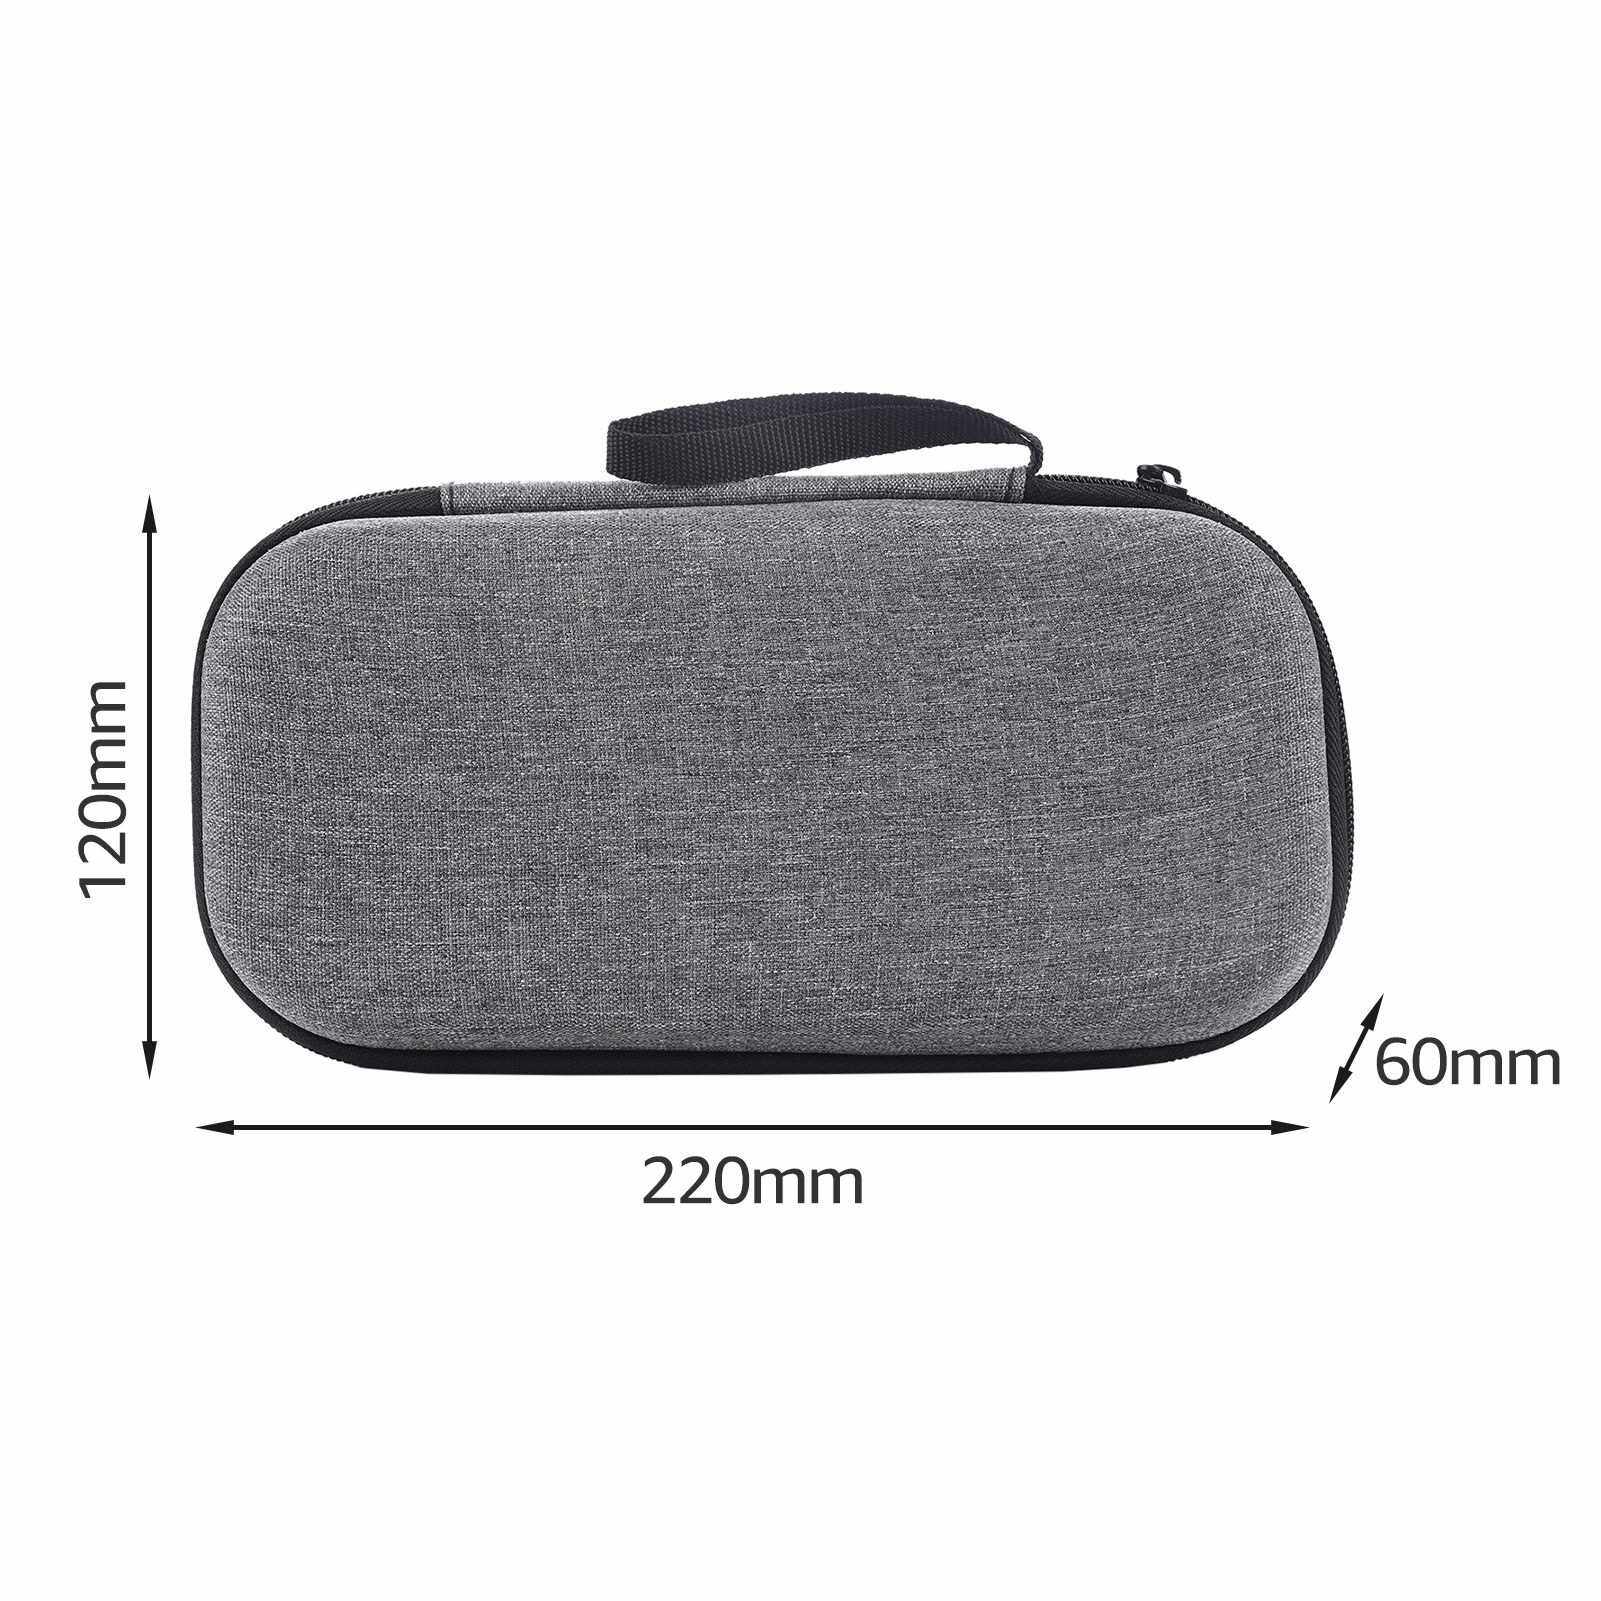 Gimbal Portable Bag Waterproof Storage Bag Stabilizer Carrying Case with Lanyard Replacement for Hohem iSteady X Zhiyun XS Feiyu Vimble One Smartphone Gimbal (Grey)